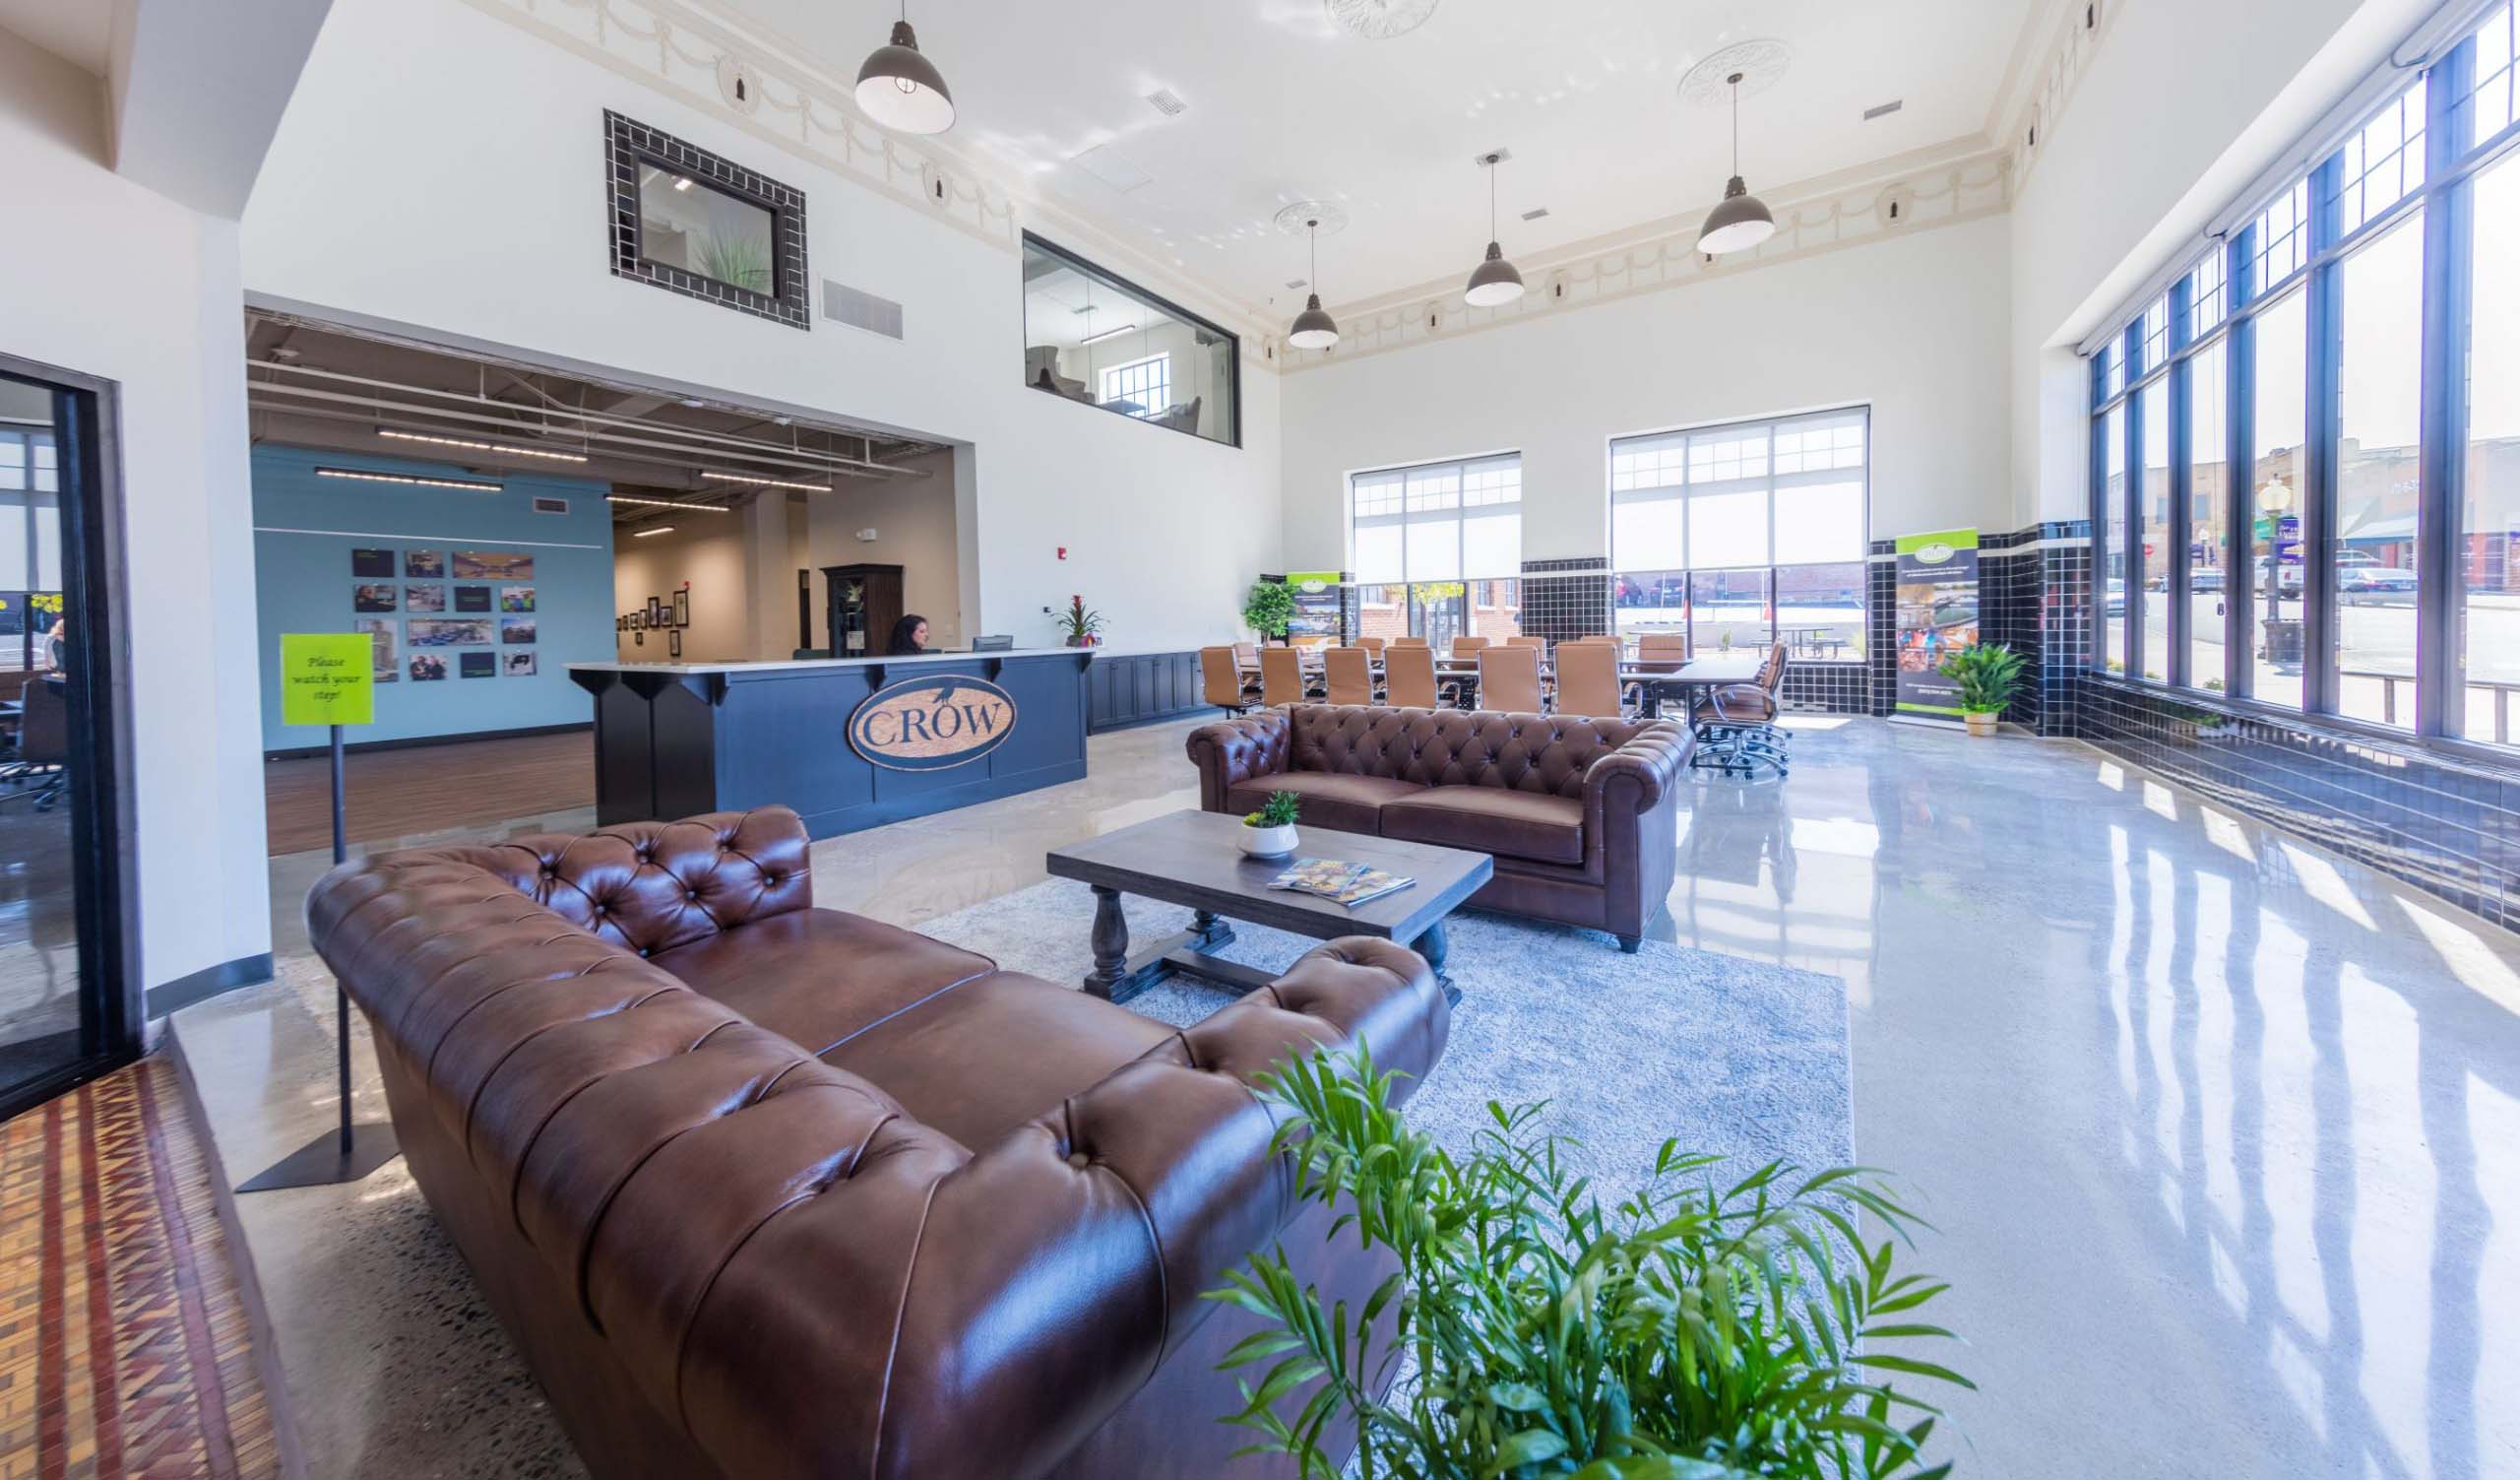 Tolm corporate headquarters lobby with high ceiling, leather couches, and walls of windows letting in lots of sunlight.